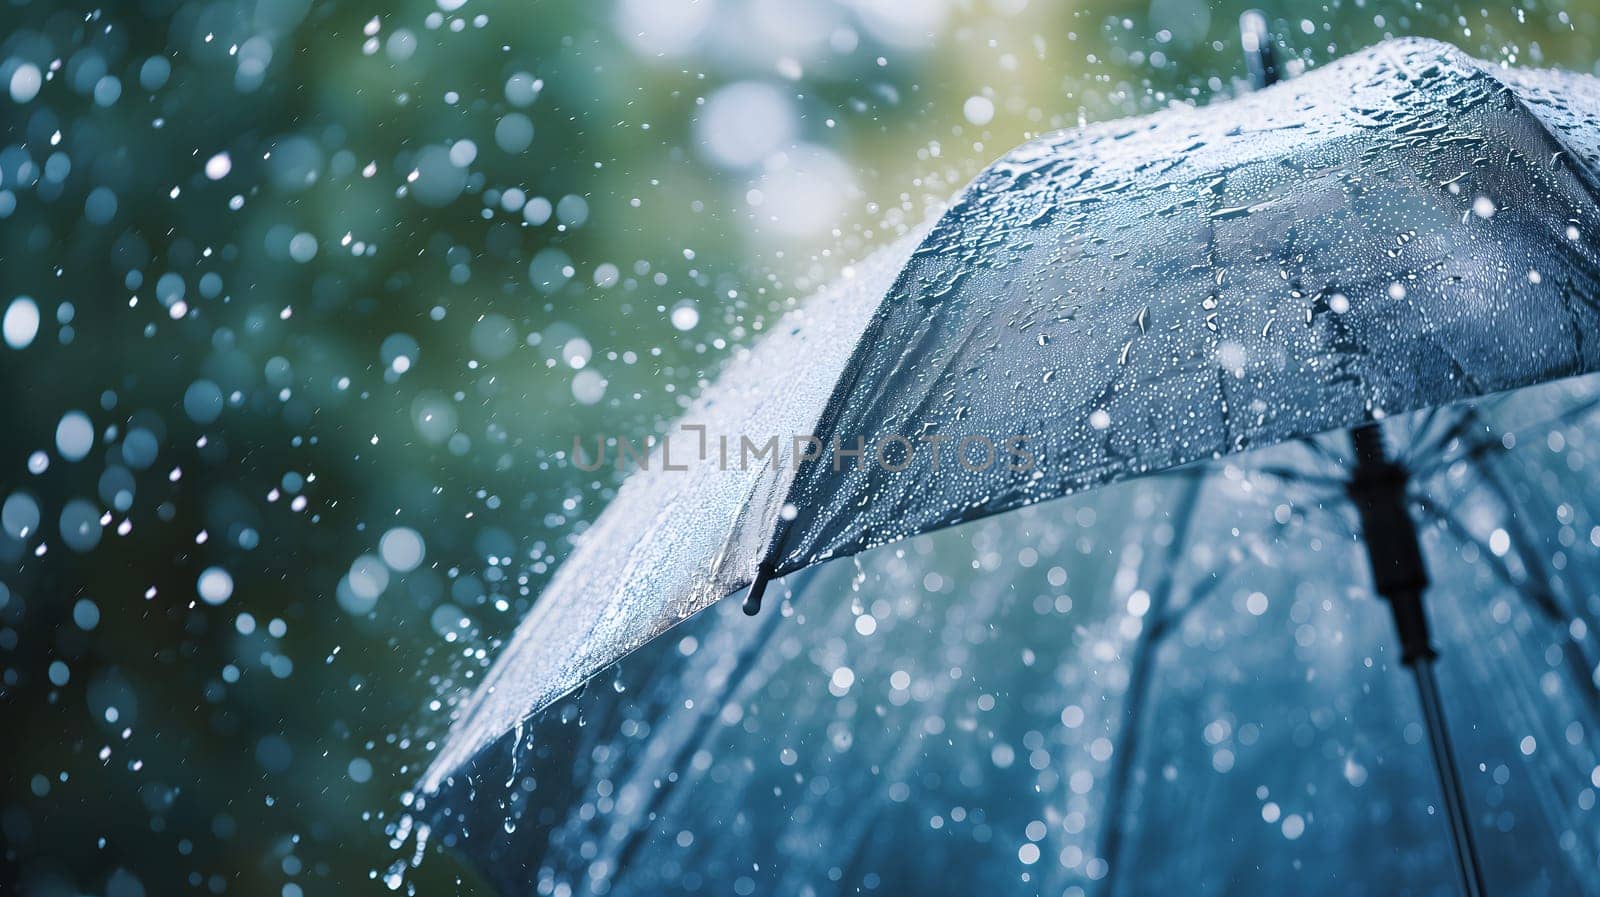 Close up, transparent umbrella under rainfall against a background of water droplets splashing. Concept of rainy weather. by z1b